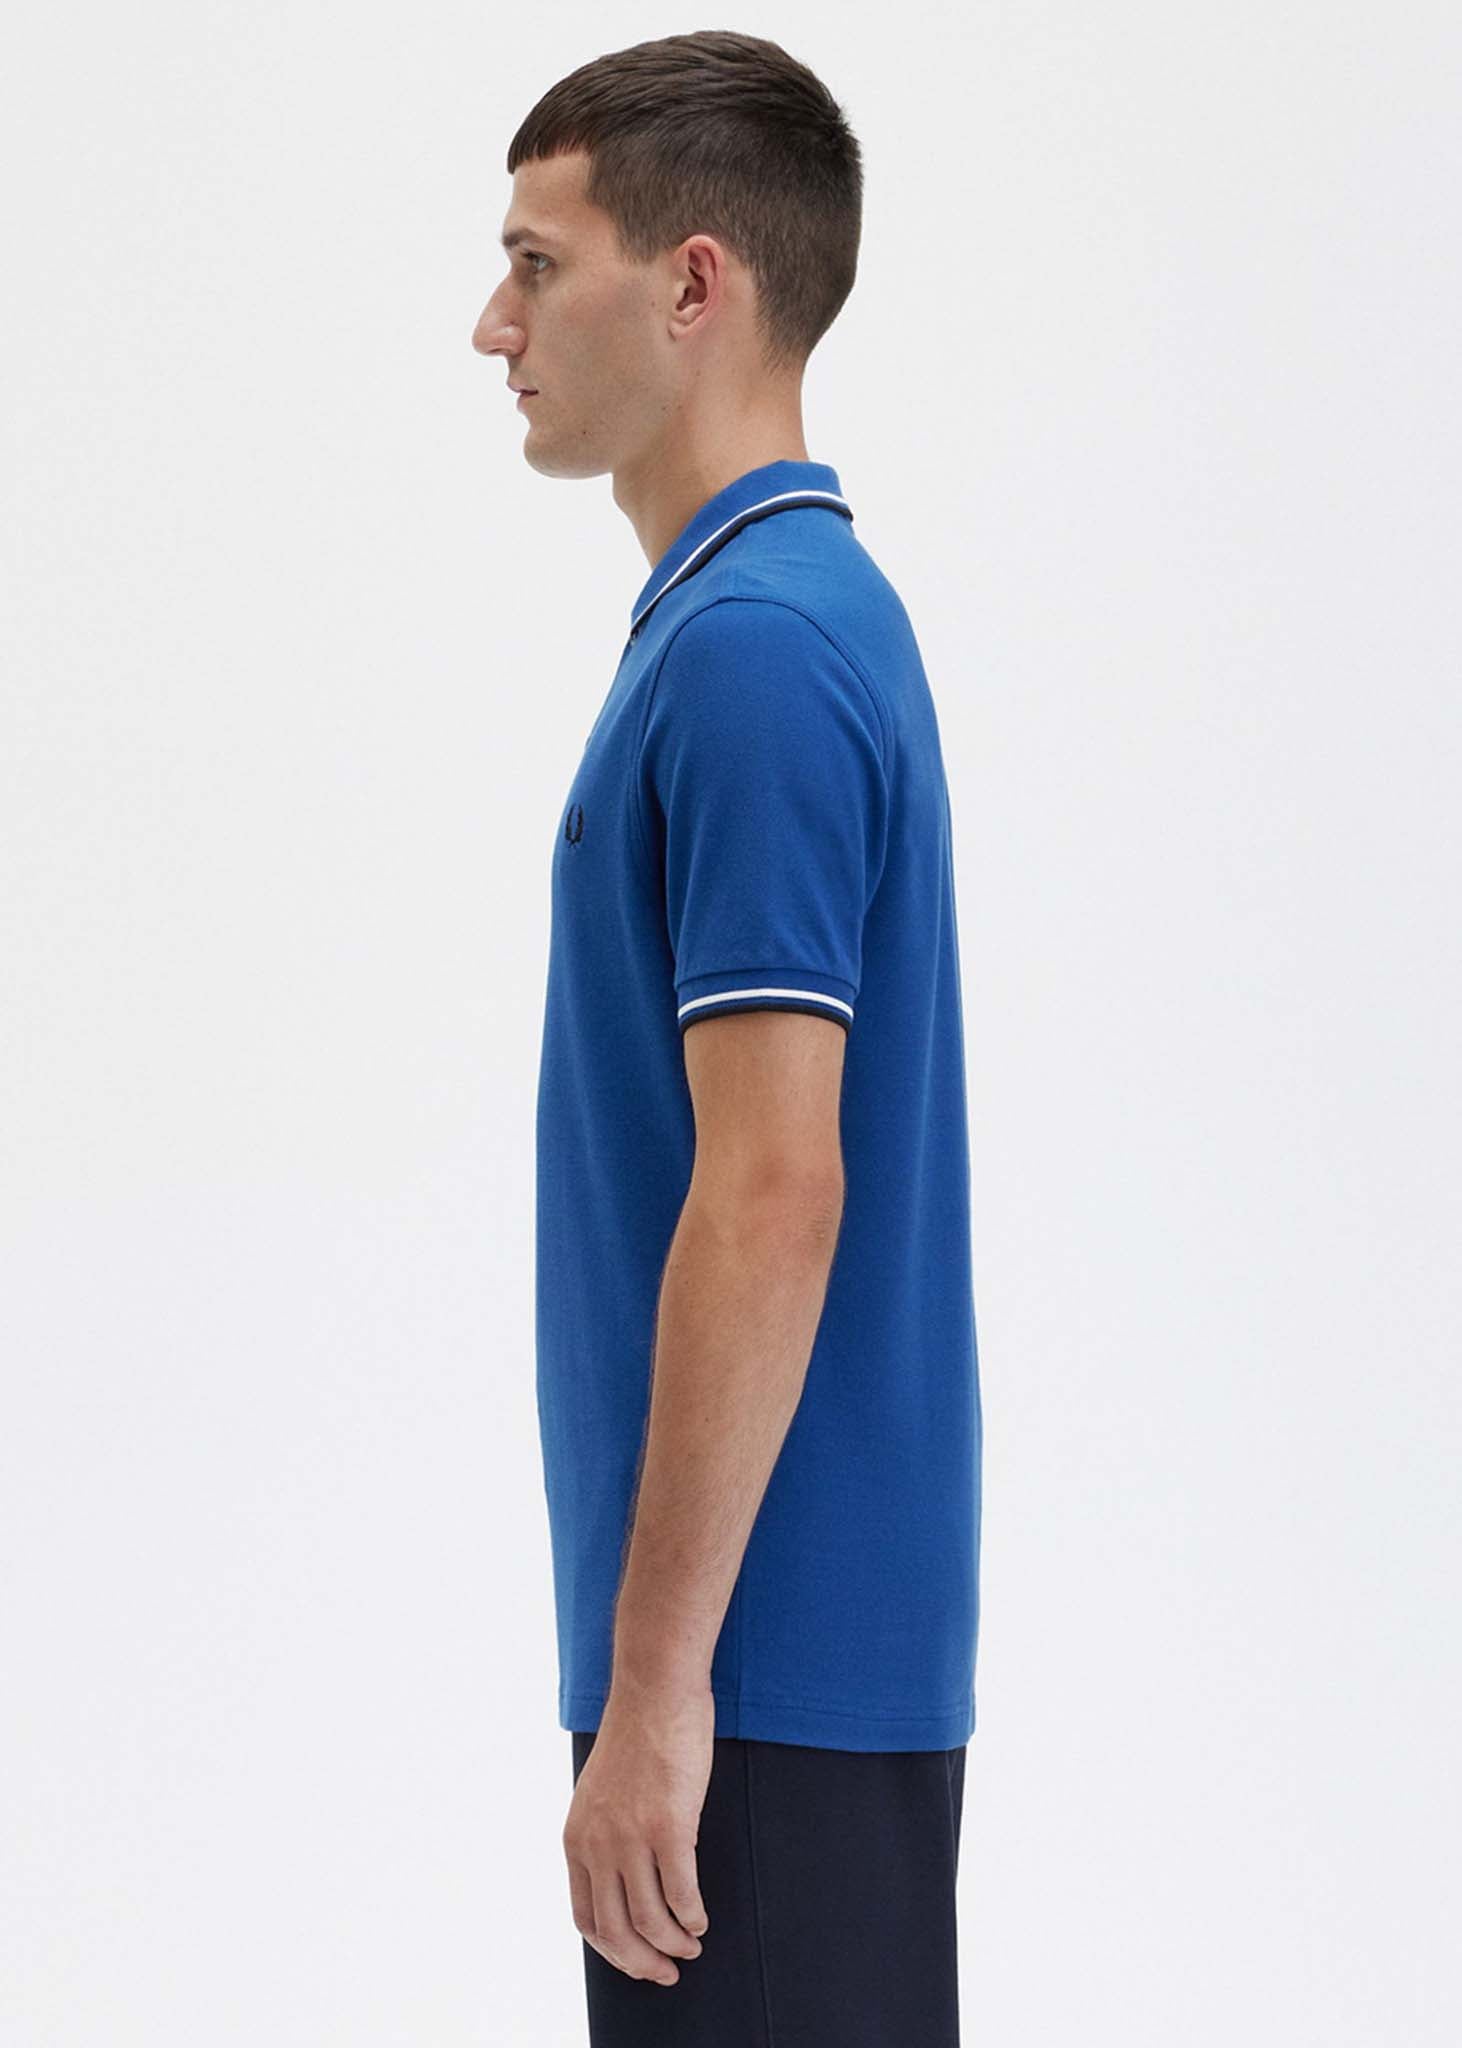 Fred Perry Polo's  Twin tipped fred perry shirt - shaded cobalt 